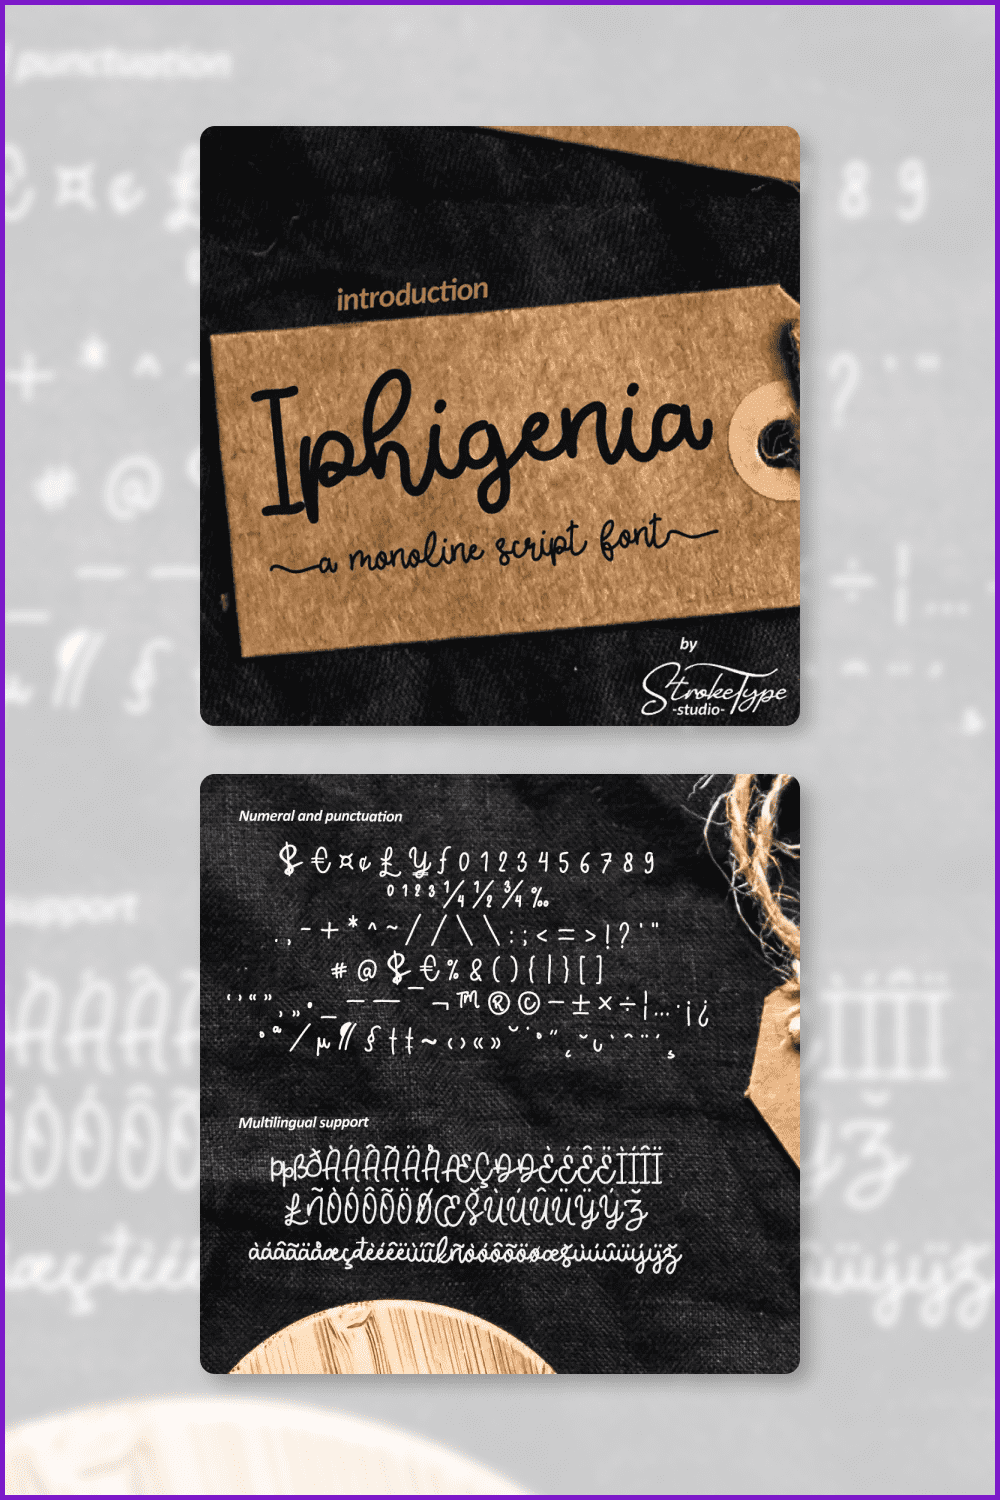 An example of a Iphigenia Monoline Script Font on a postcard with a black and brown background.